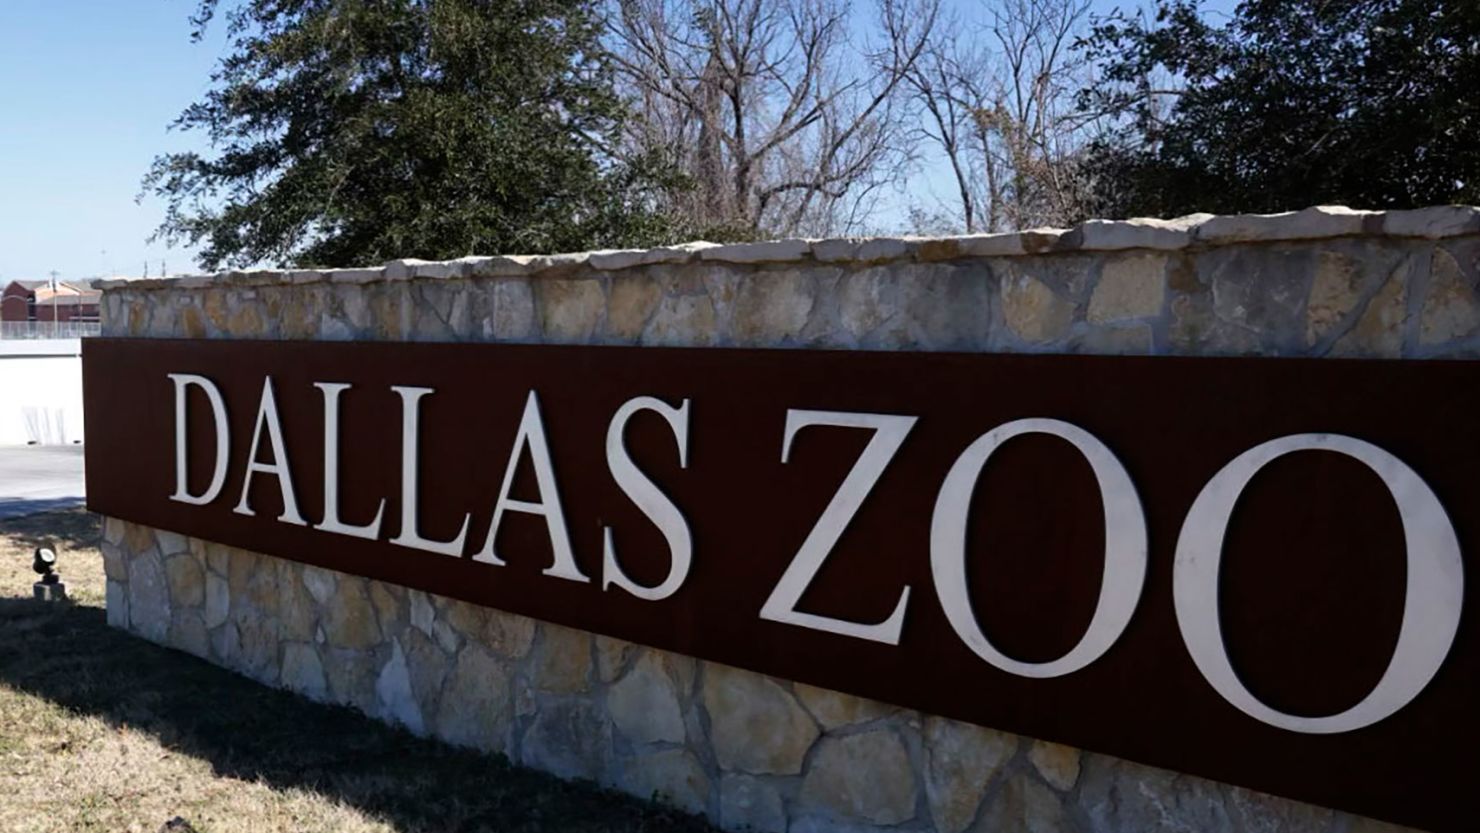 Dallas Zoo monkey enclosure fencing cut on same day as tampering